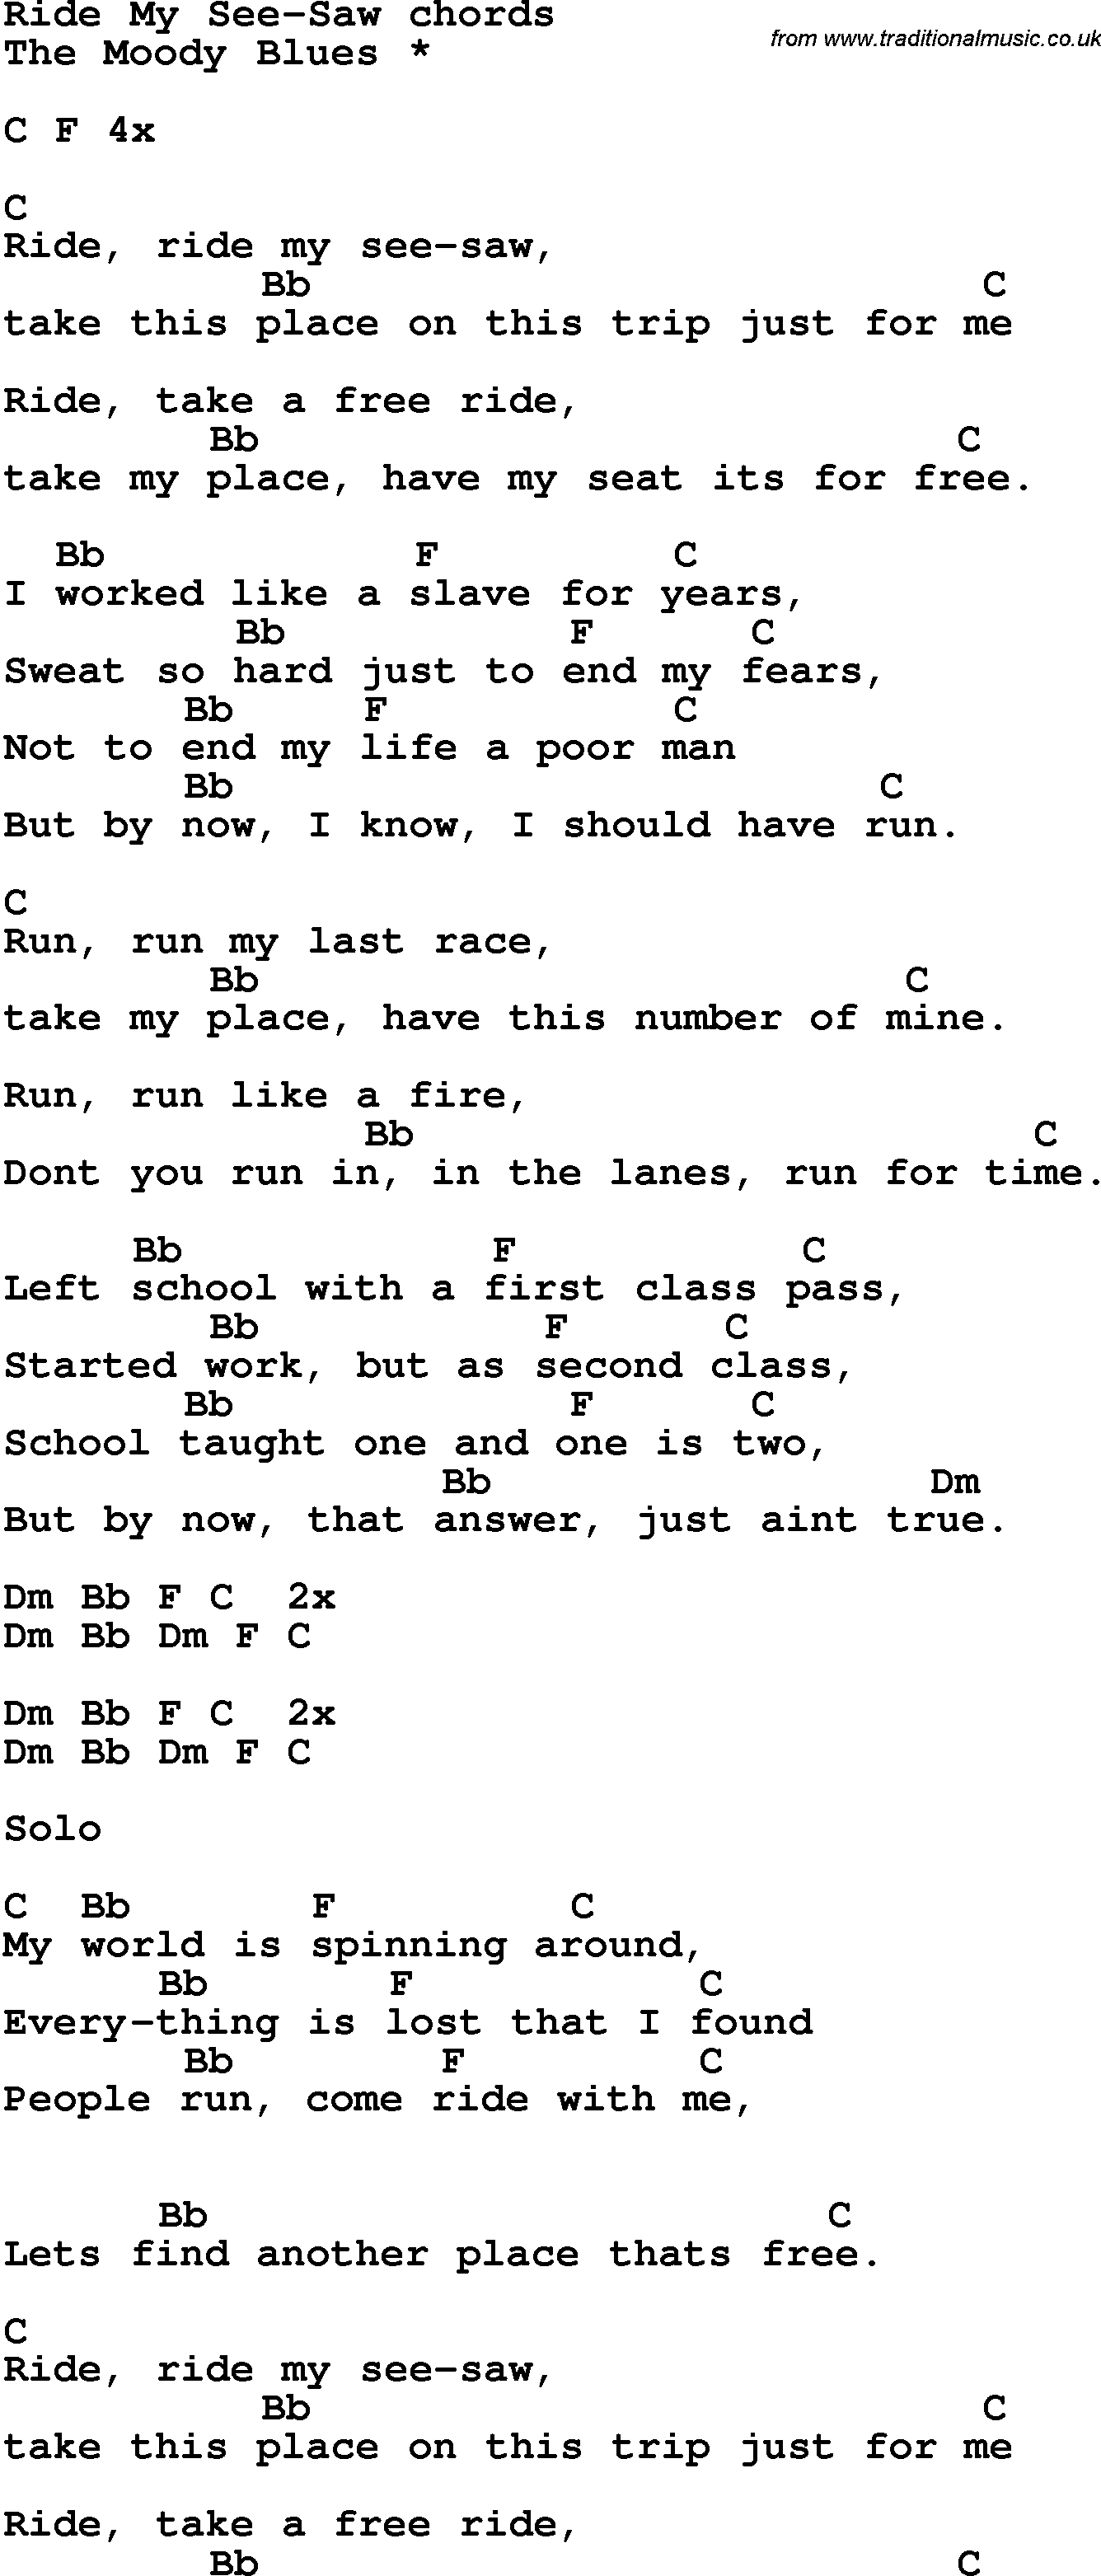 Song Lyrics with guitar chords for Ride My See-saw